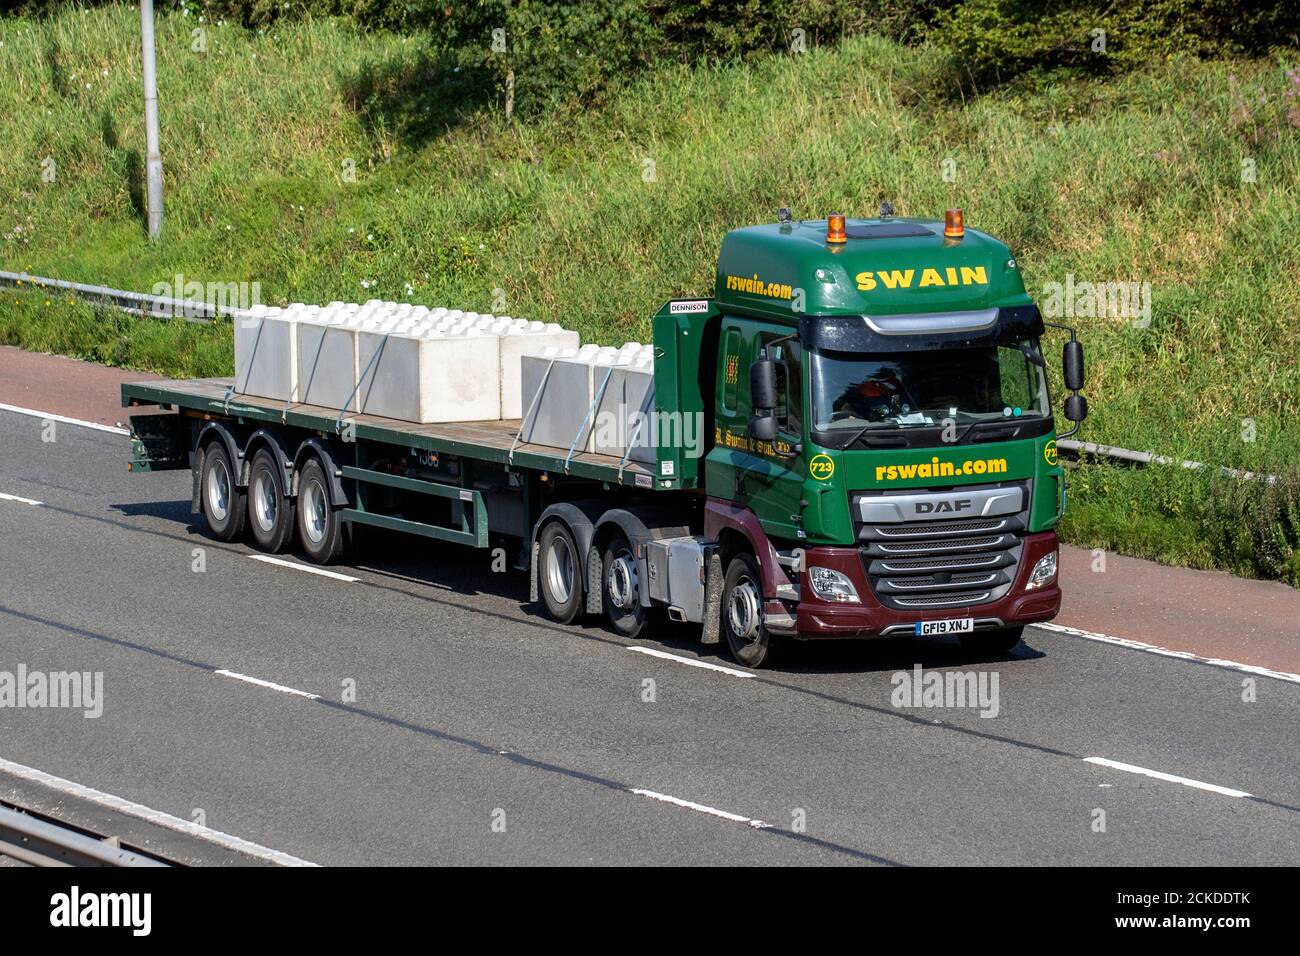 Swain Haulage delivery trucks, low-loader lorry, transportation, truck, cargo carrier, DAF vehicle, European commercial transport industry HGV, M6 at Manchester, UK Stock Photo